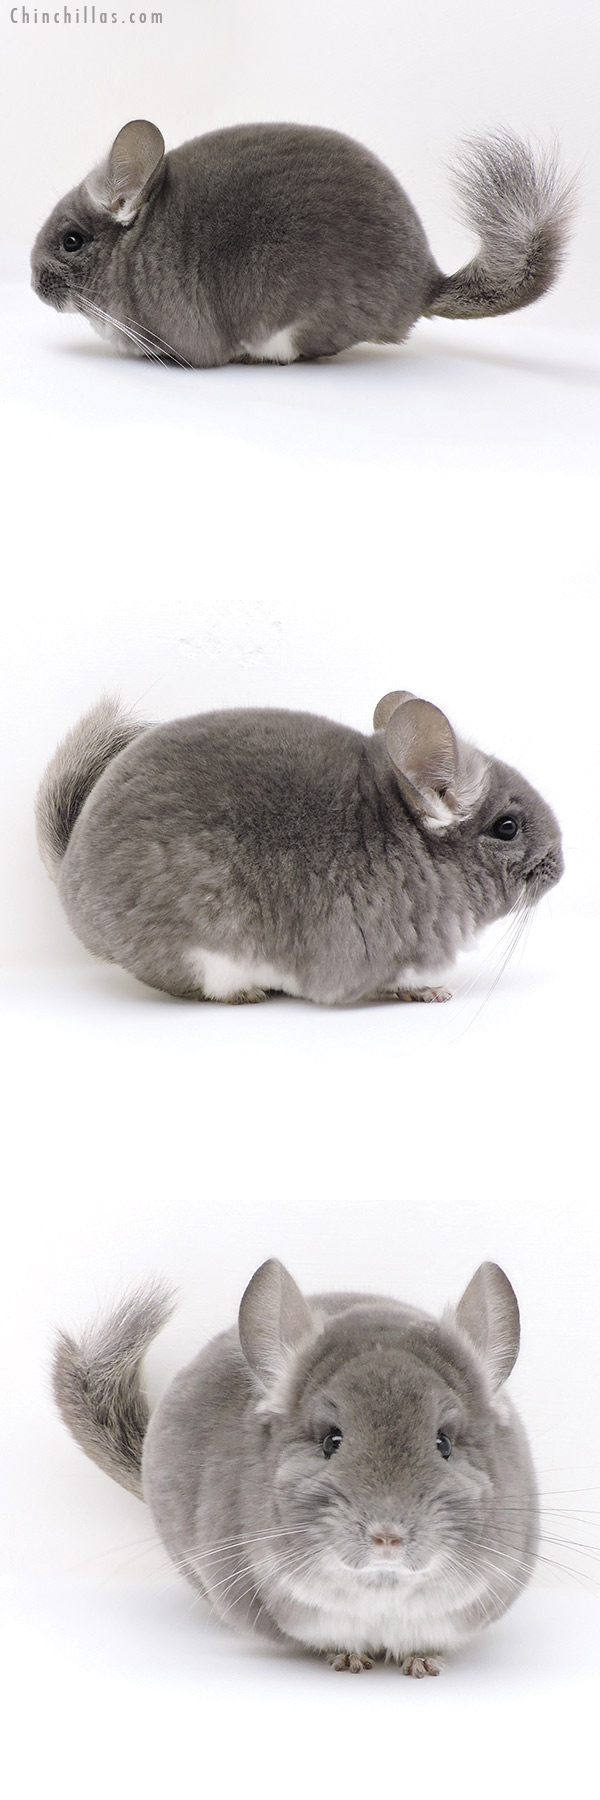 Chinchilla or related item offered for sale or export on Chinchillas.com - 18035 Top Show Quality TOV Violet Male Chinchilla